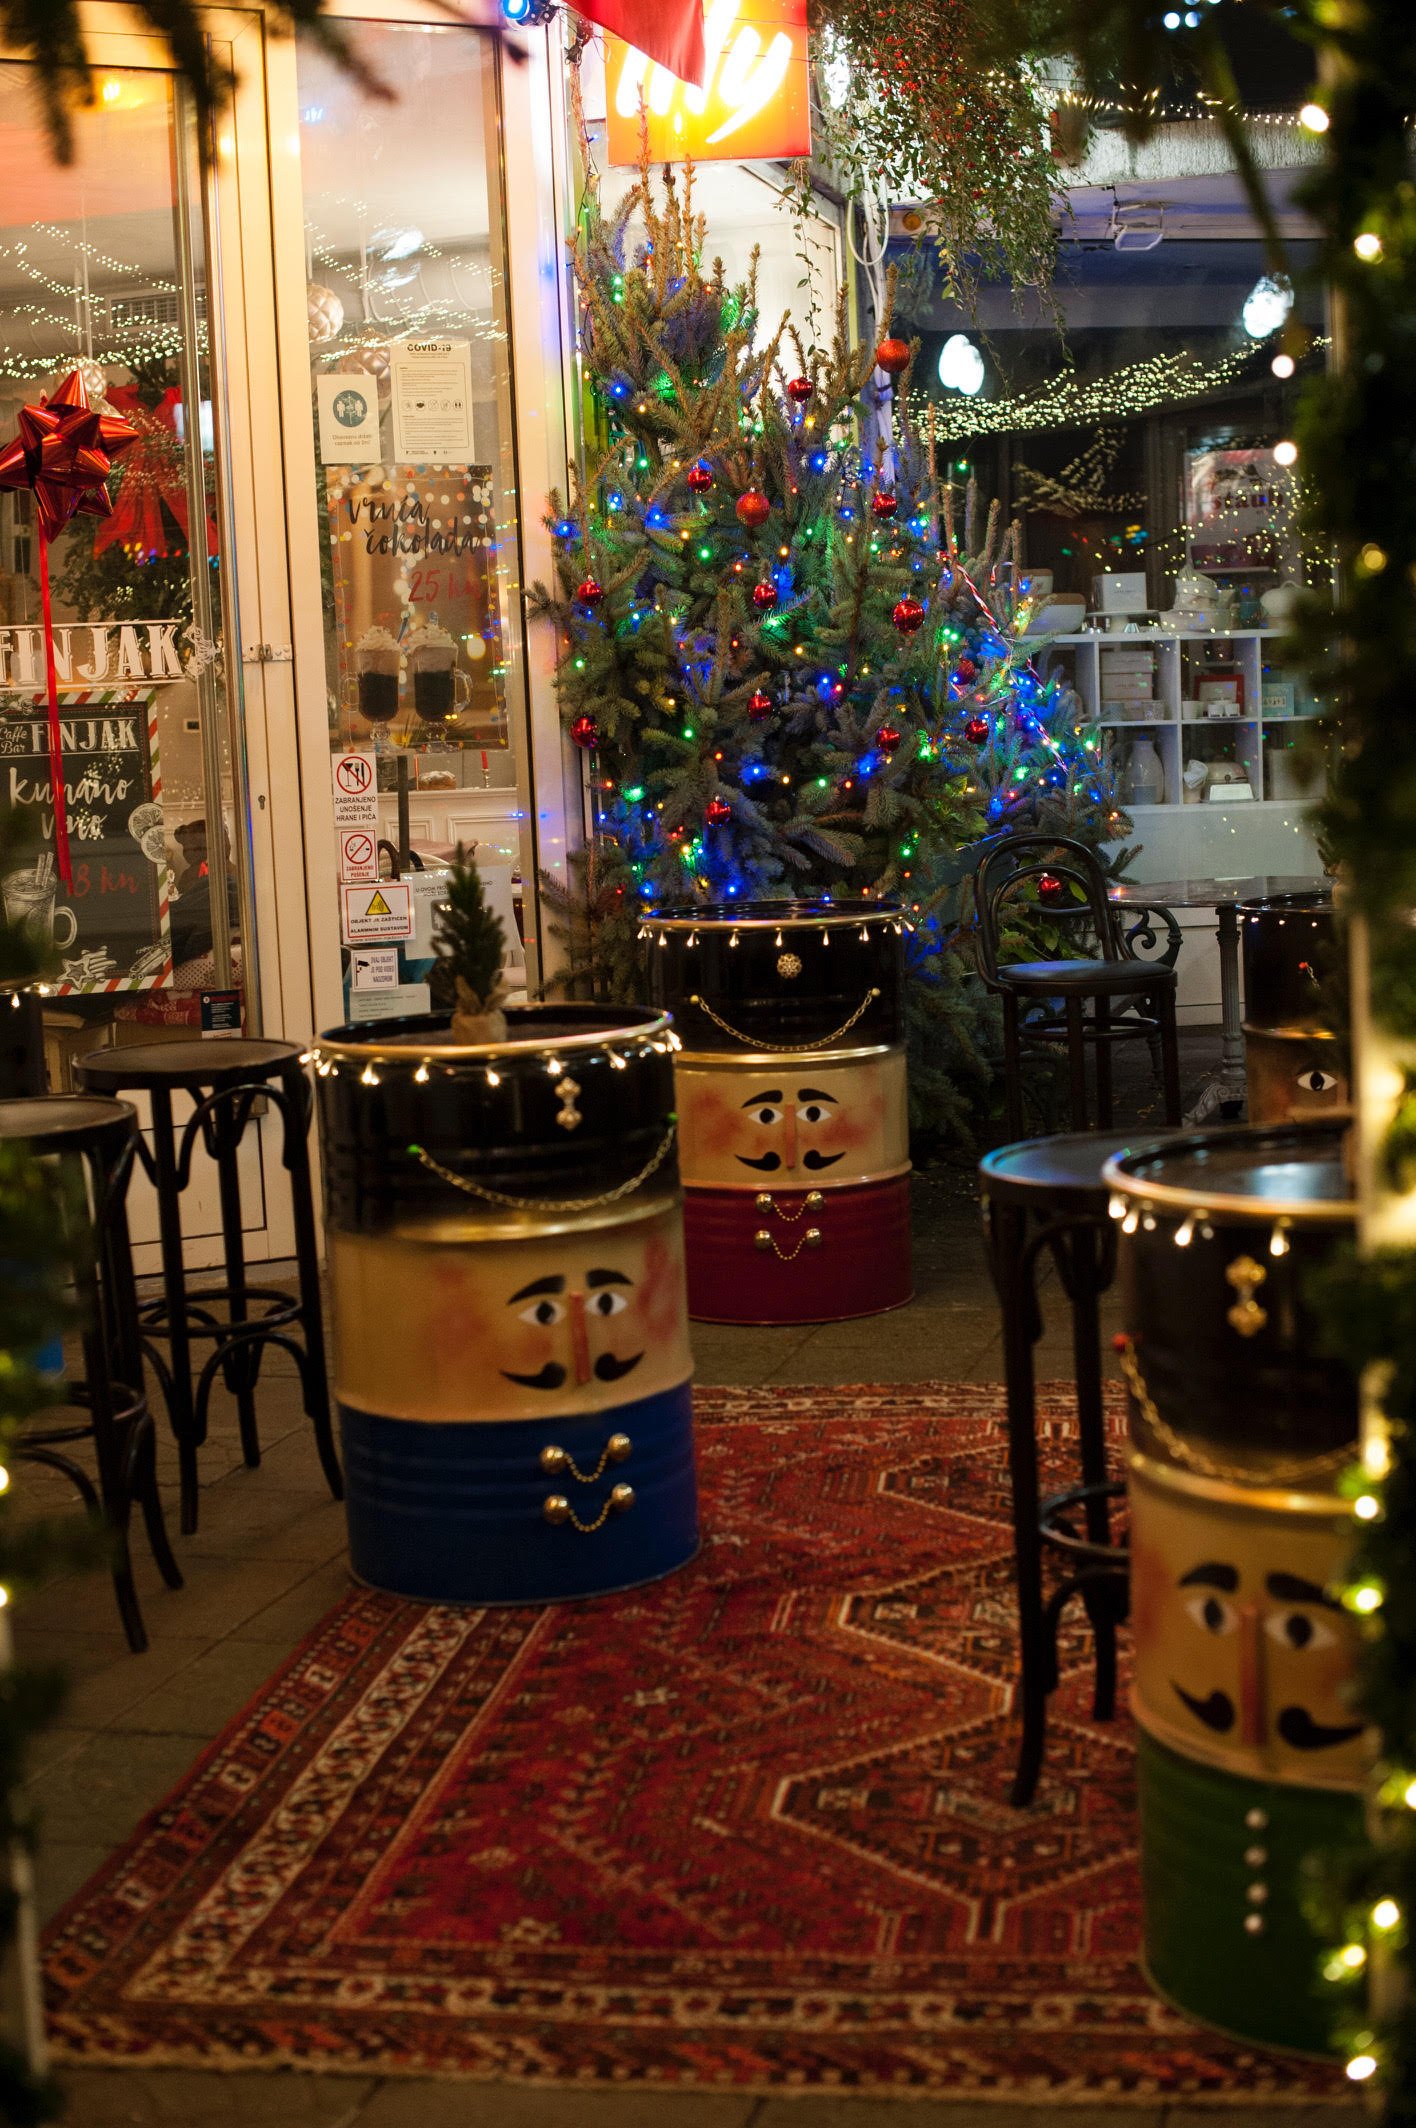 Fairy tale Christmas atmosphere at cafe bar Finjak in Zagreb 